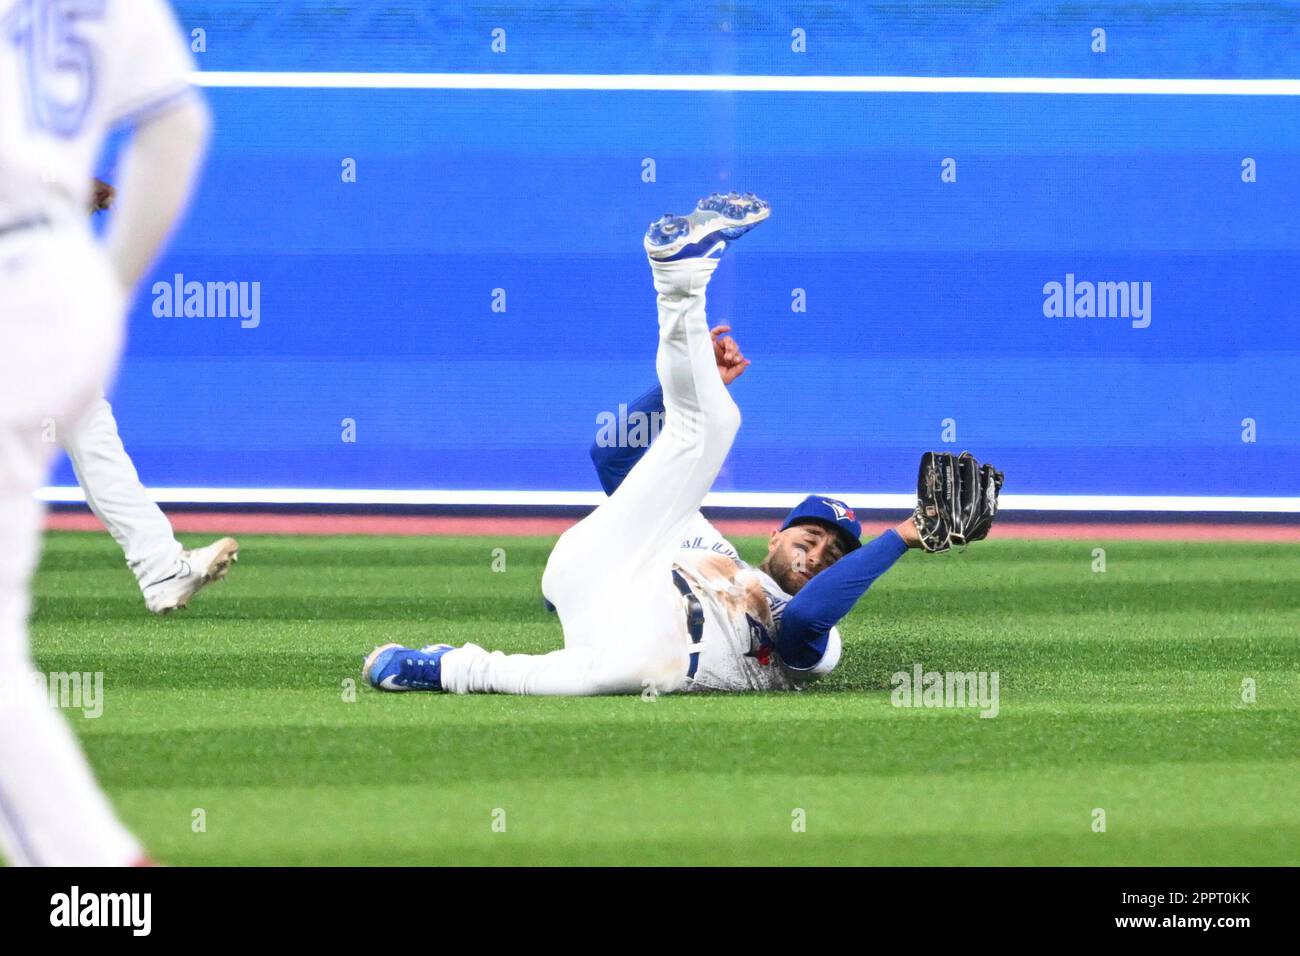 TORONTO, ON - APRIL 24: Toronto Blue Jays left fielder Daulton Varsho (25)  makes the sliding catch in the outfield during the MLB regular season game  between the Chicago White Socks and